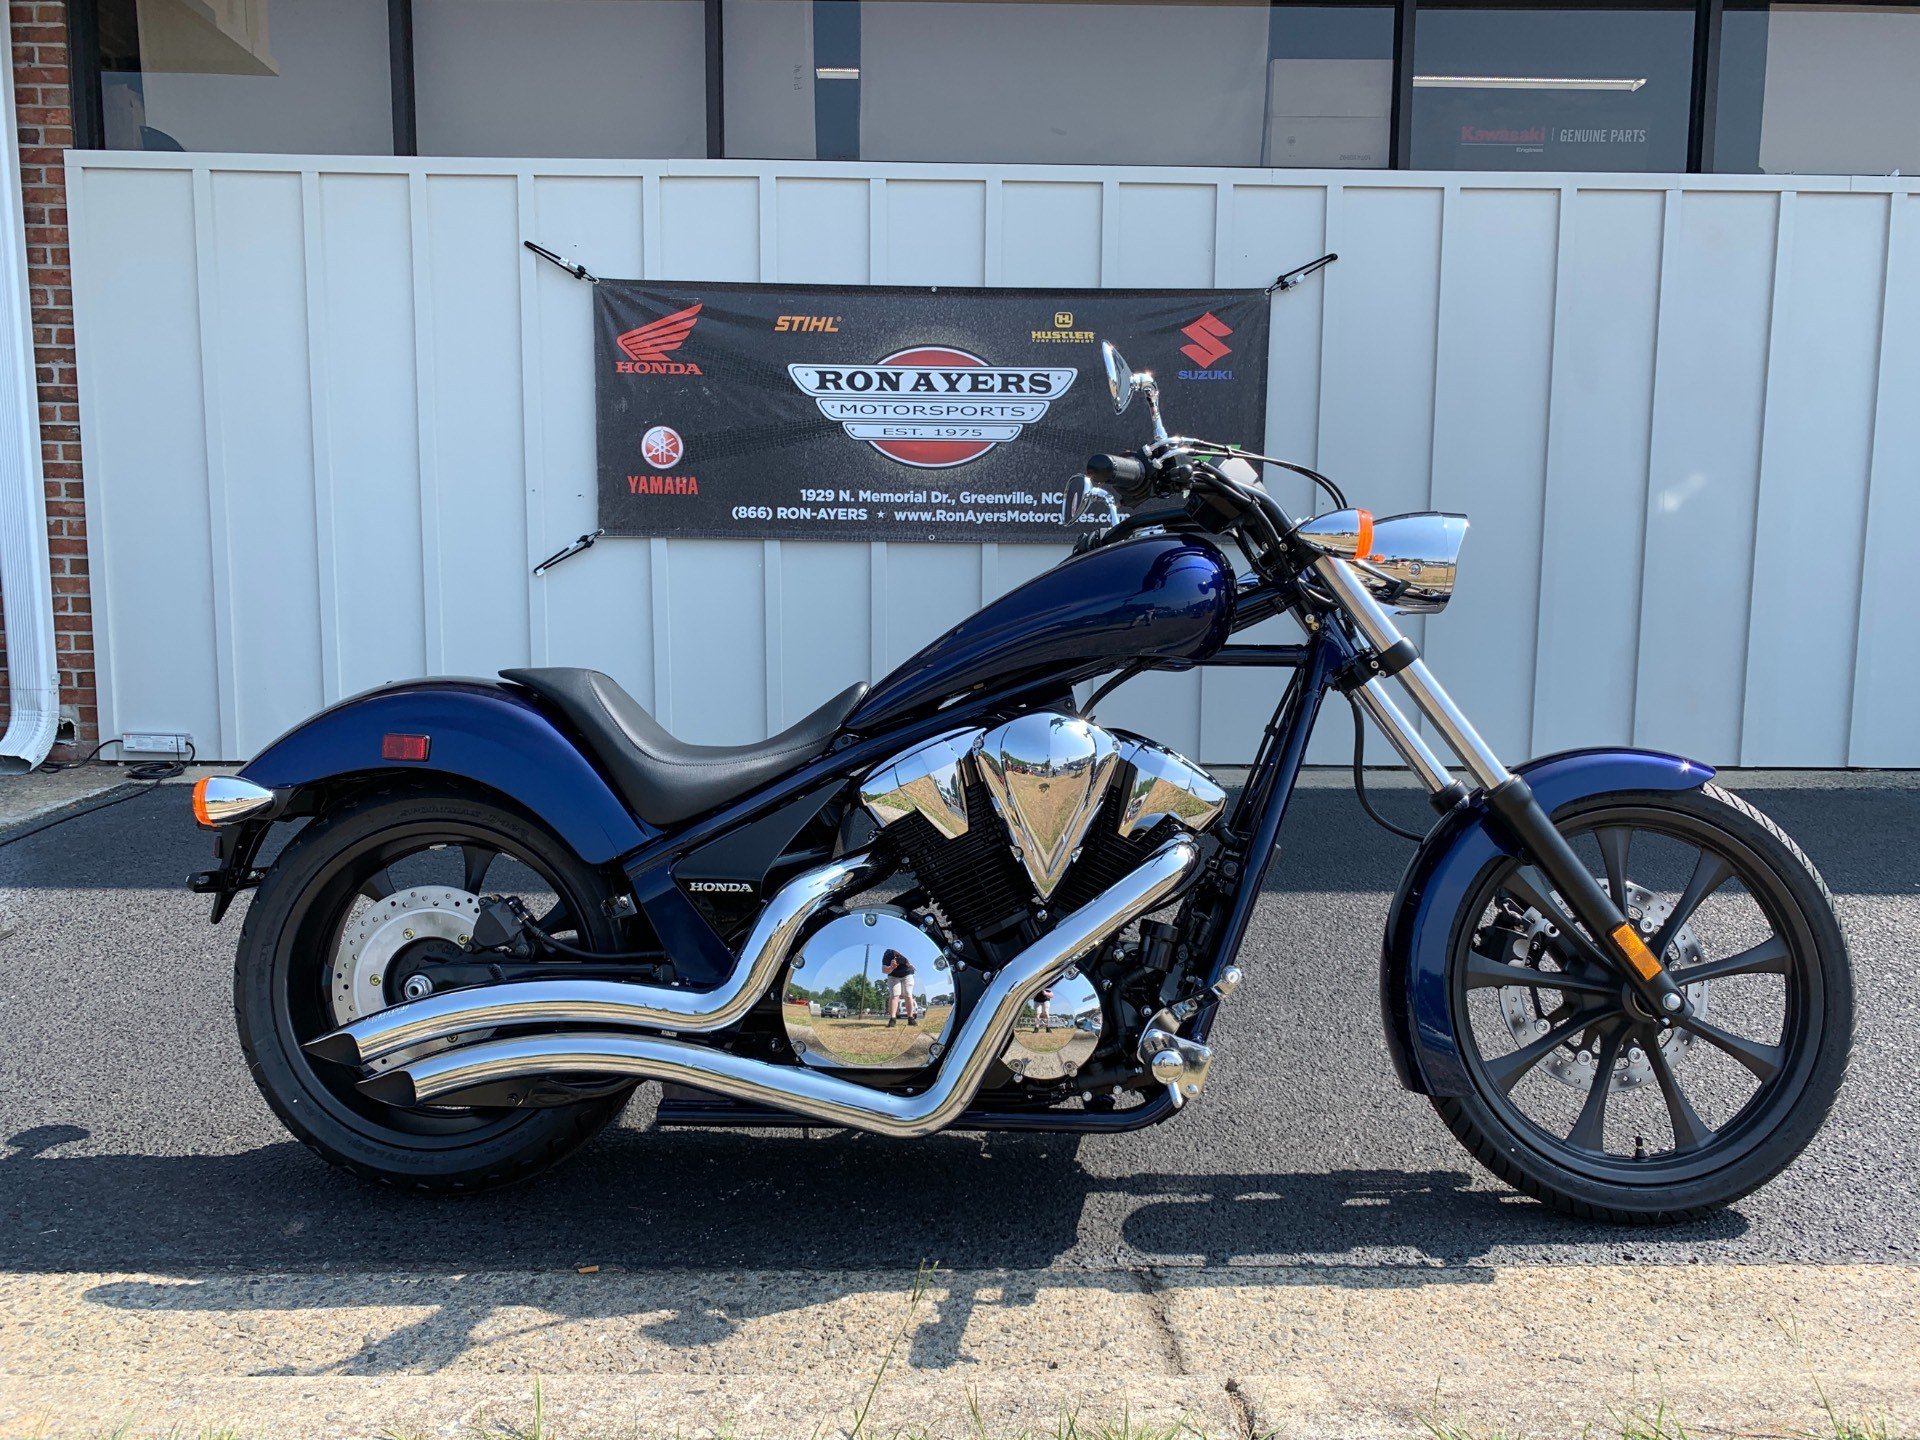 New 2019 Honda Fury Motorcycles In Greenville Nc Stock Number N A